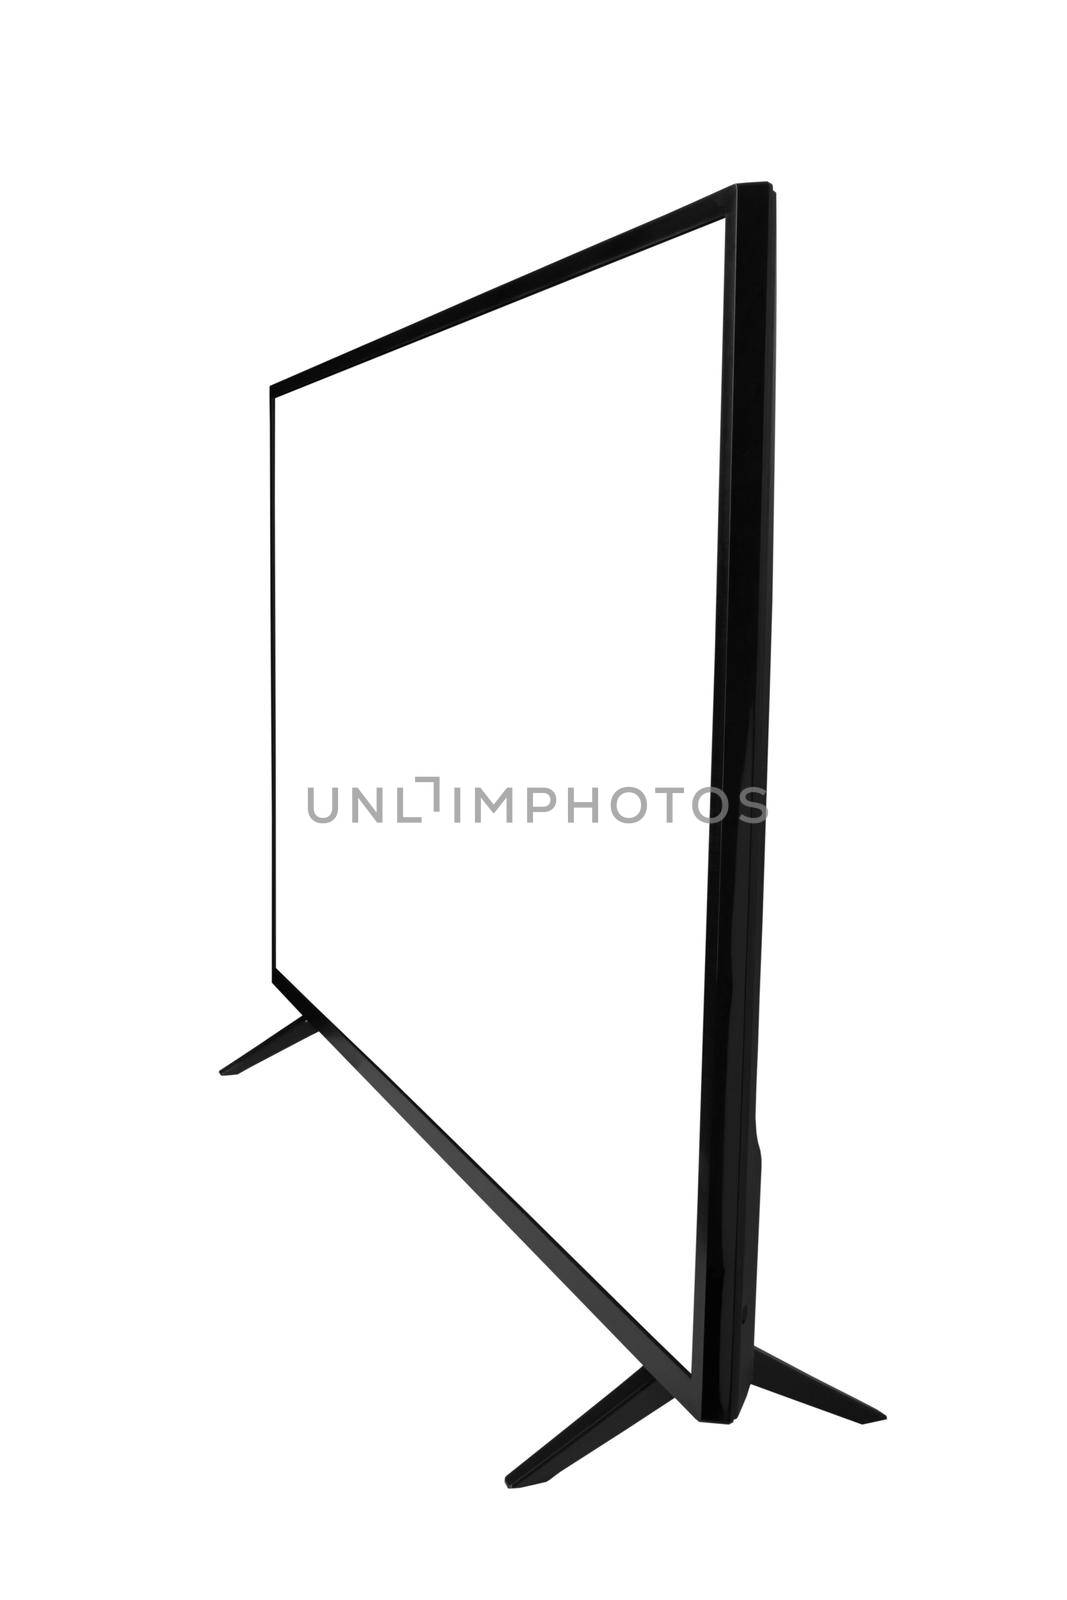 Windscreen led or lcd internet tv monitor isolated on white background